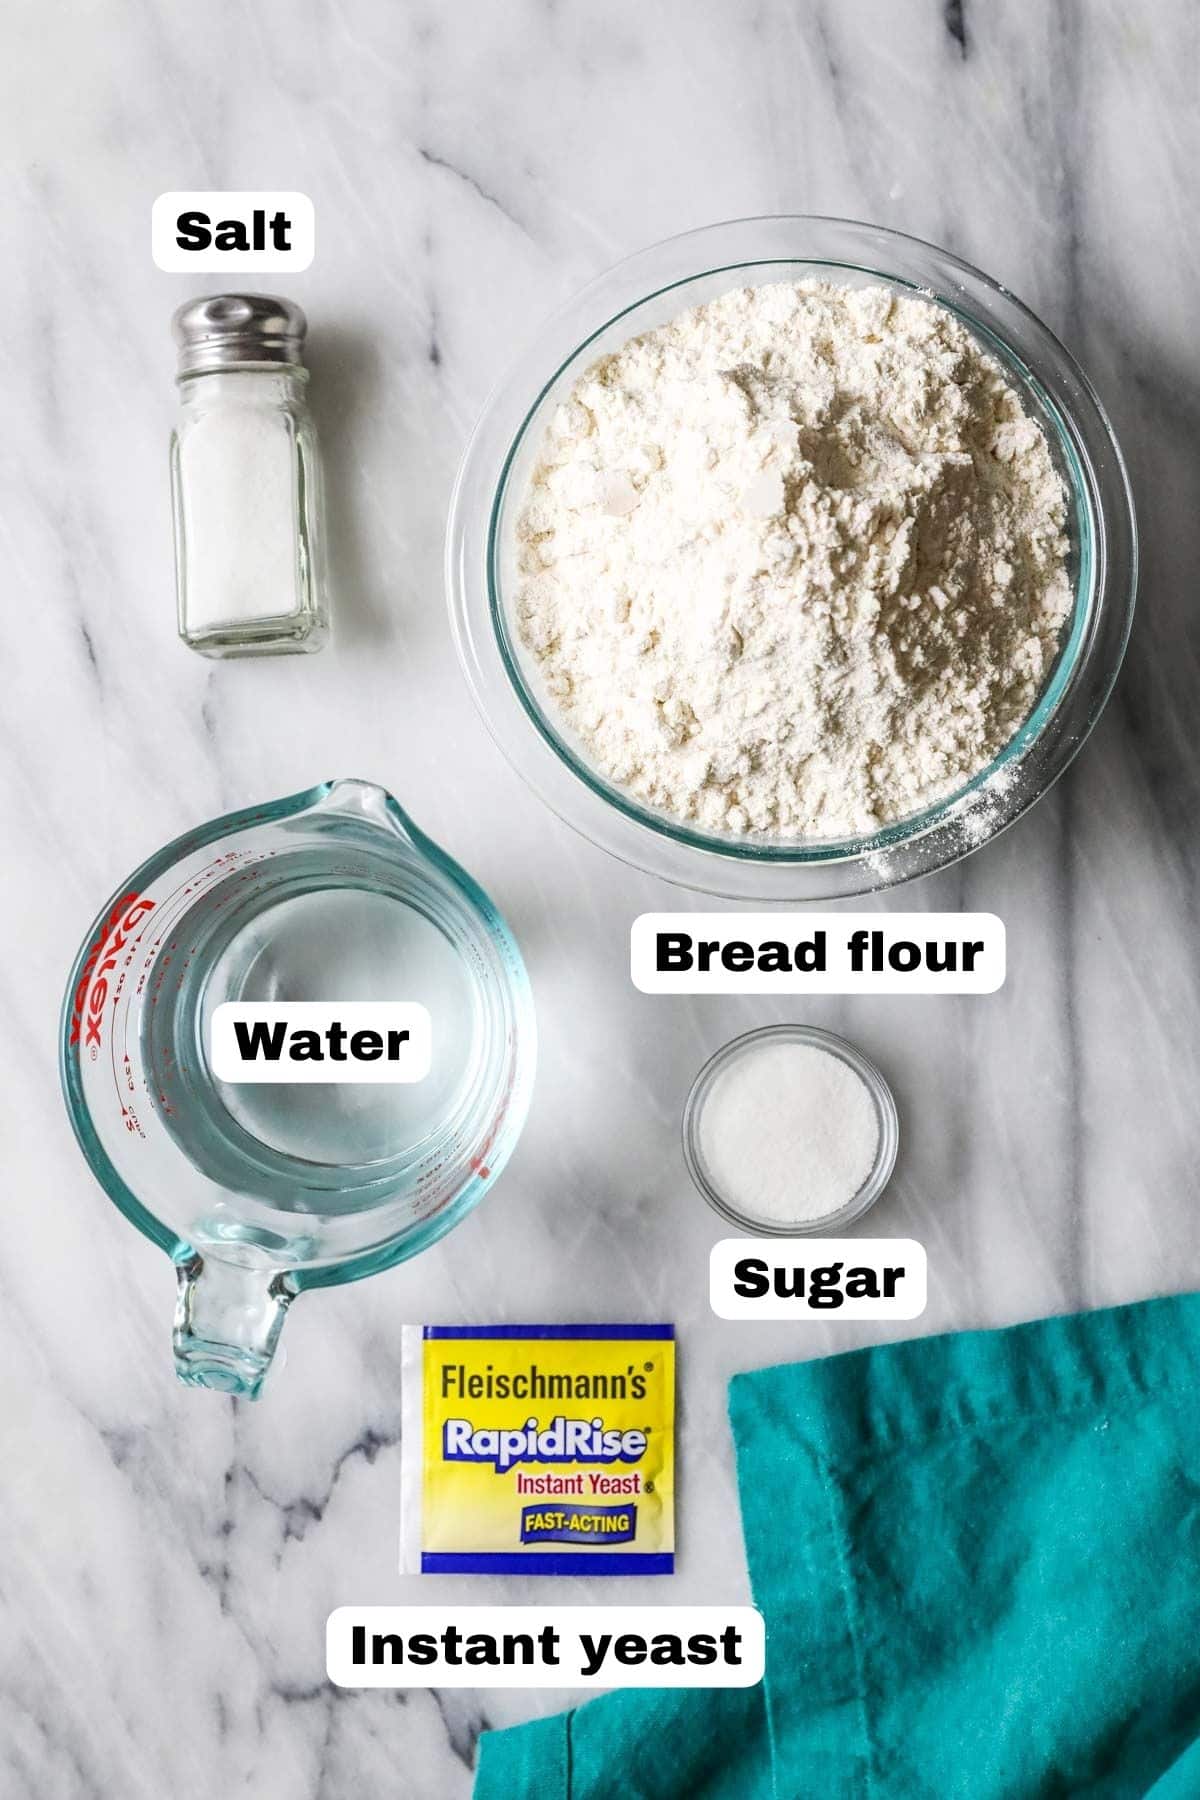 Overhead view of labelled ingredients including flour, yeast, sugar, water, and salt.